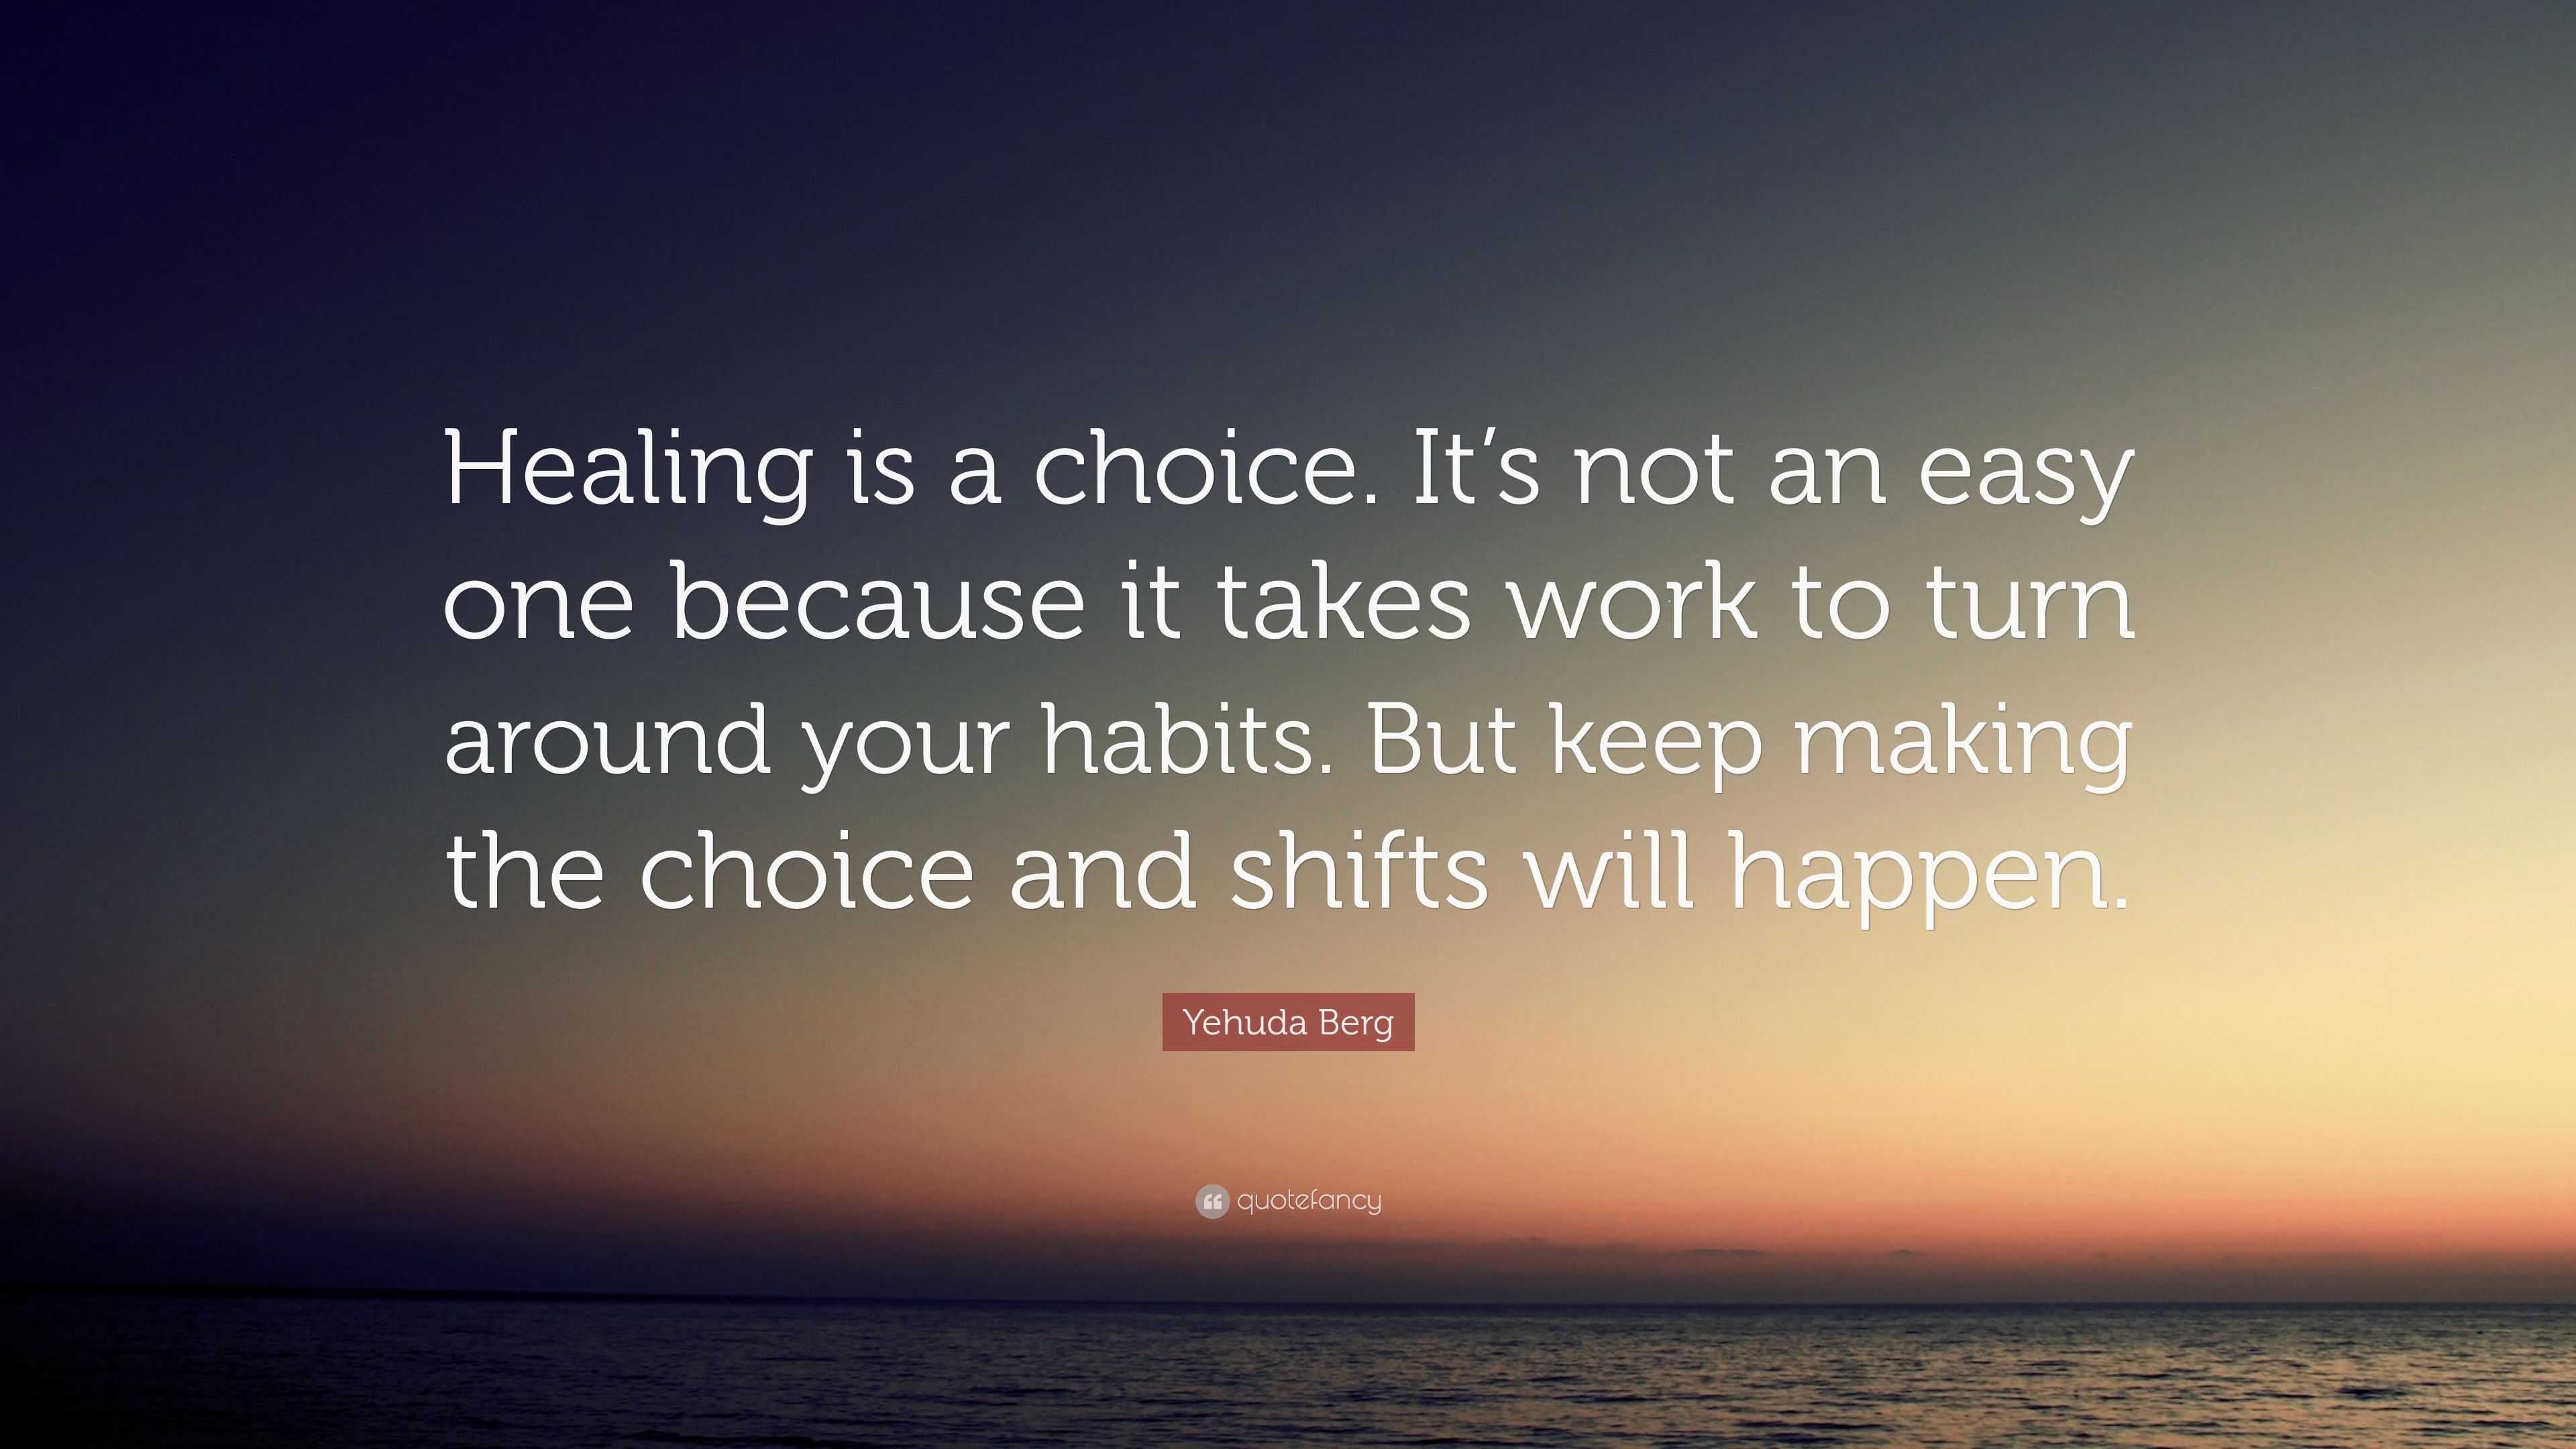 Yehuda Berg Quote: “Healing is a choice. It’s not an easy one because ...